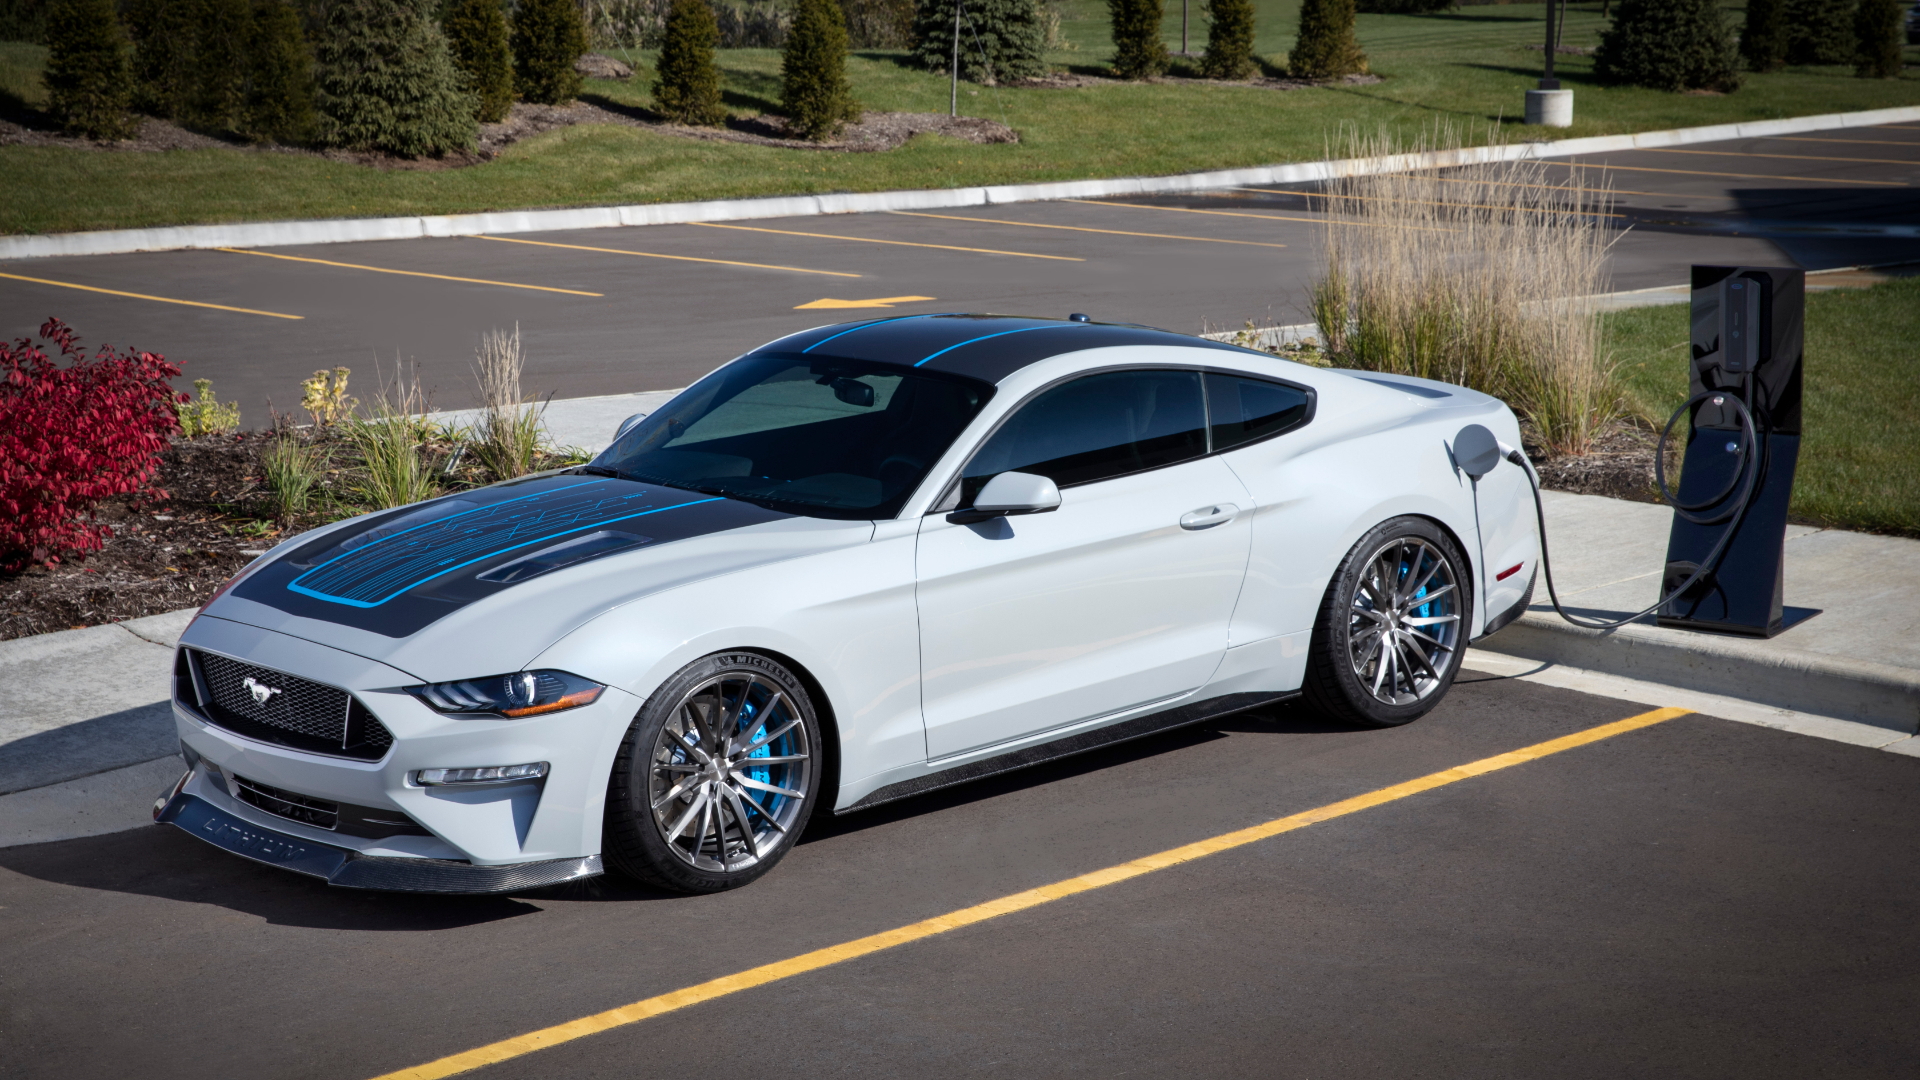 Ford Mustang Lithium electric car  -  Ford/Webasto  -  2019 SEMA show